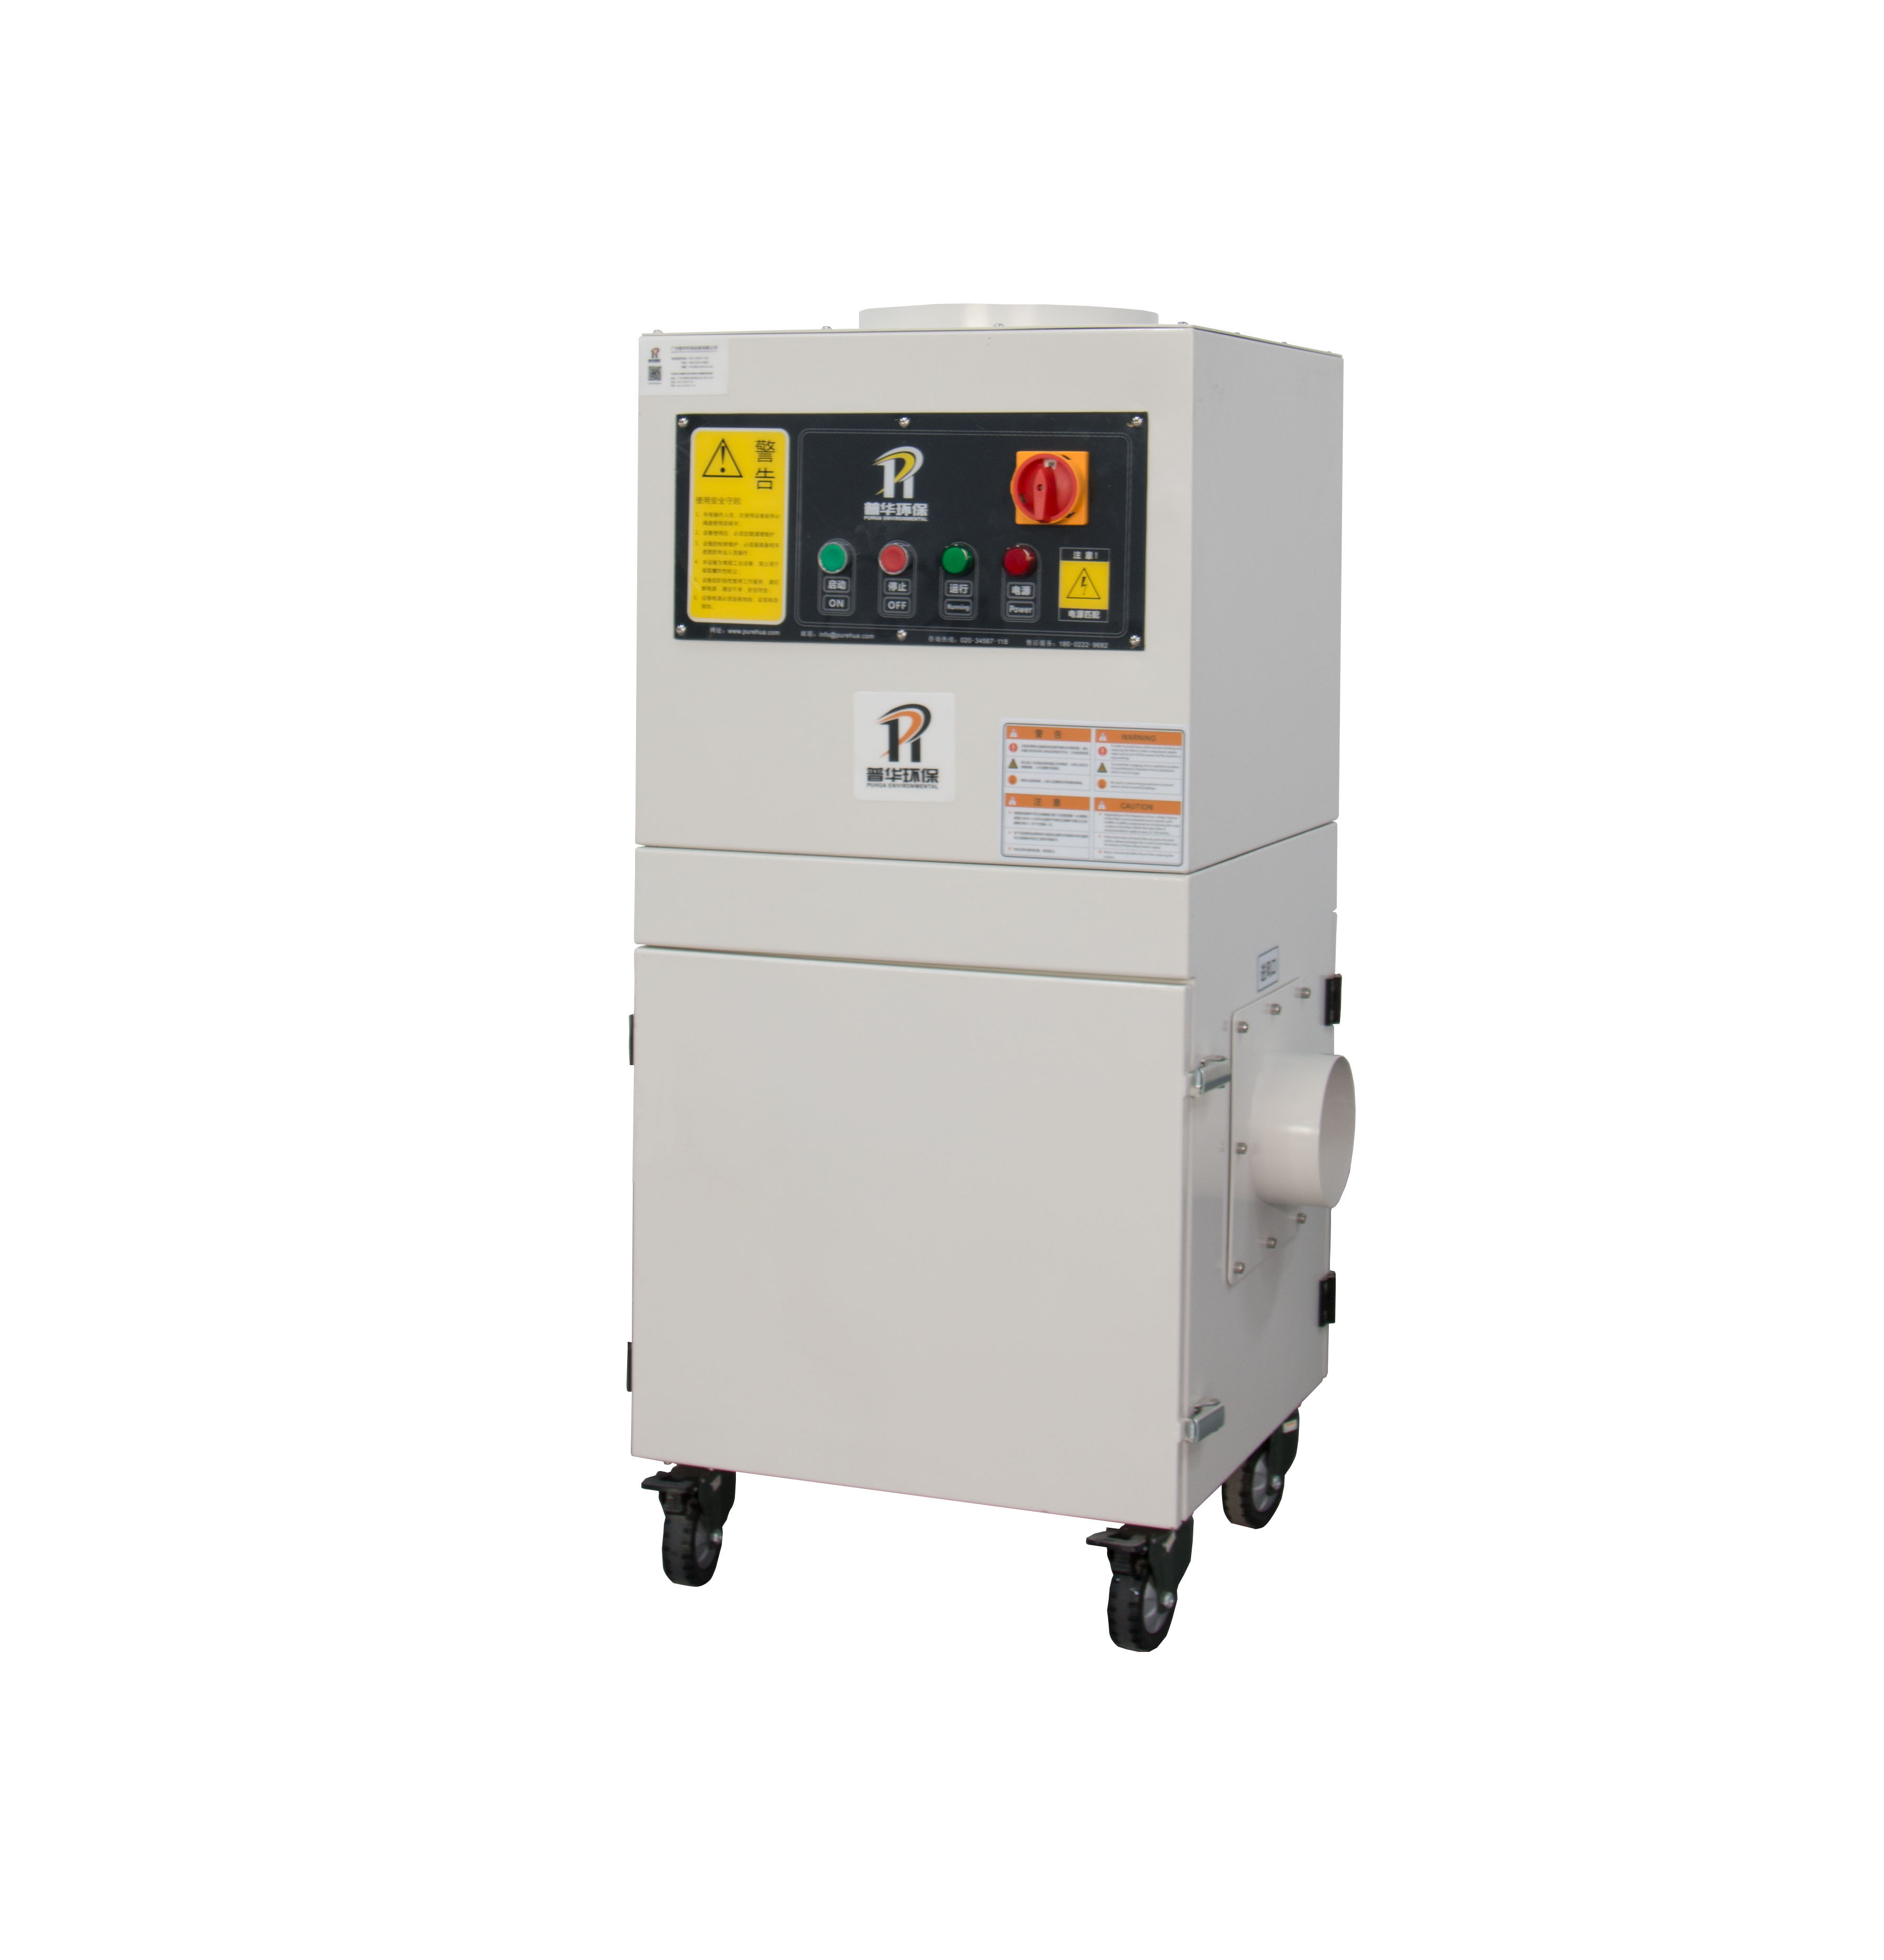 D series basic industrial dust collector